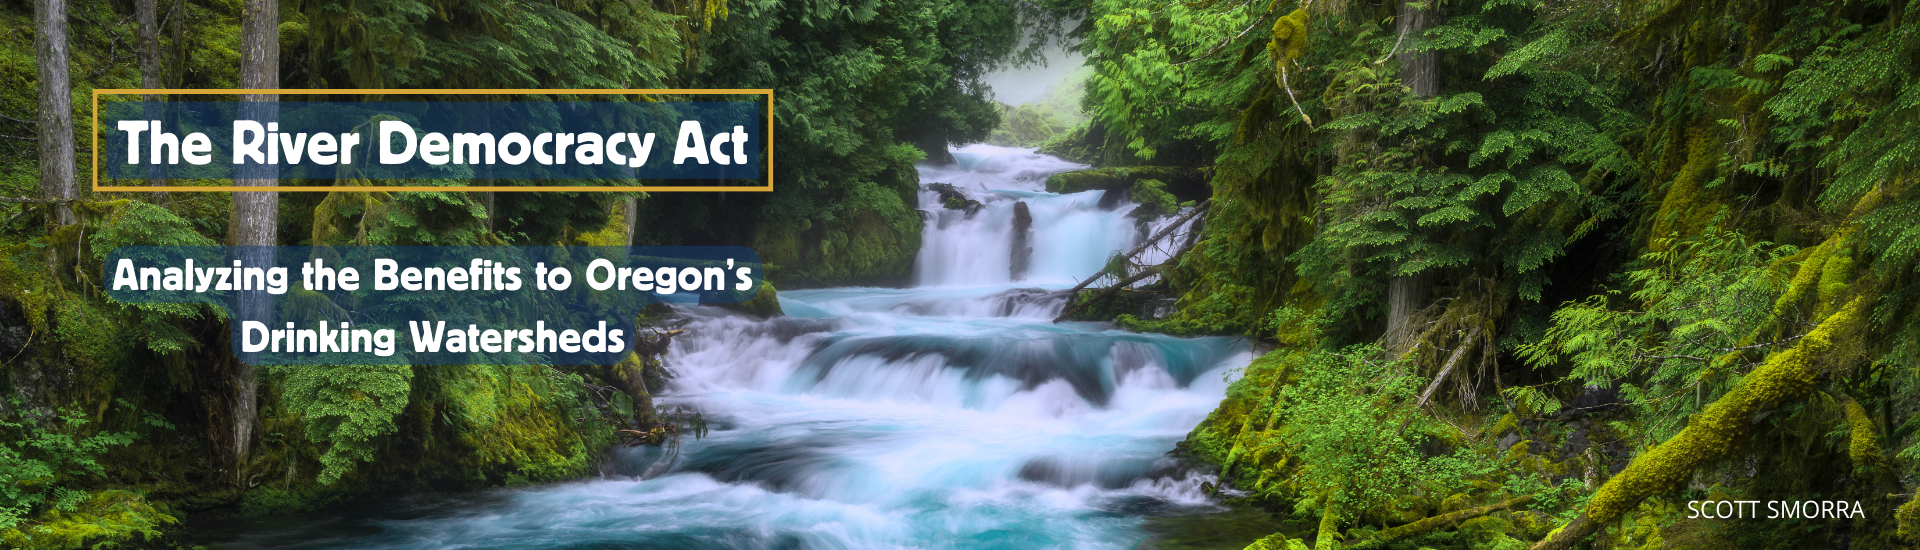 The River Democracy Act - Analyzing Benefits to Oregon's Drinking Watersheds - text over a river flowing down several cascades through a green forest